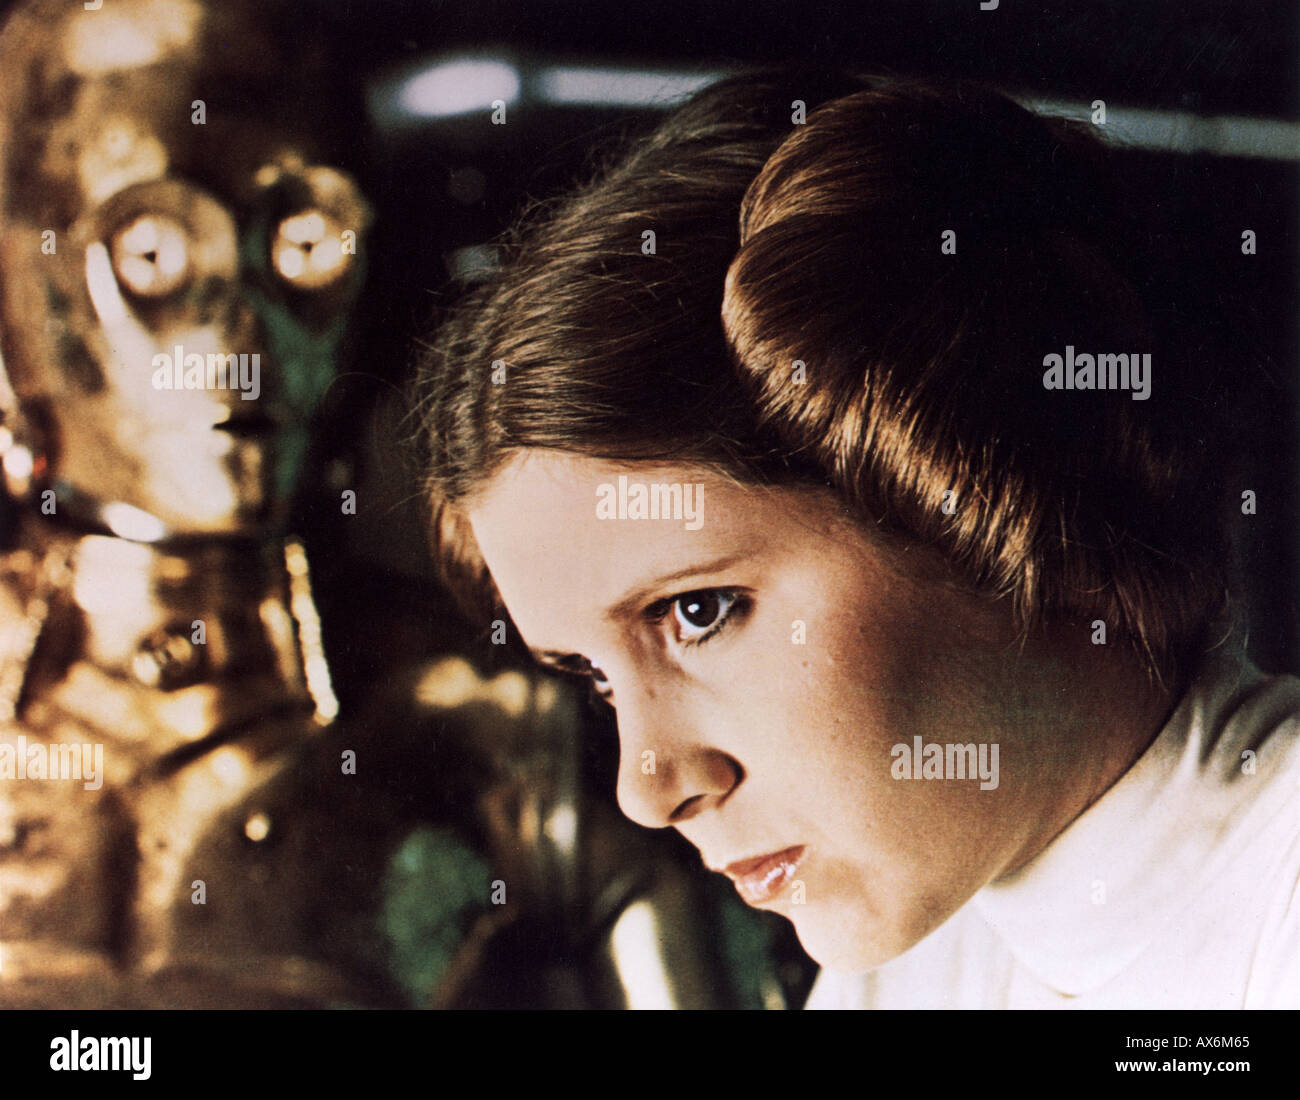 1977 TCF/Lucas film starring Carrie Fisher as Princess Leia Organa here with See Threepio played by Anthony Daniels Stock Photo